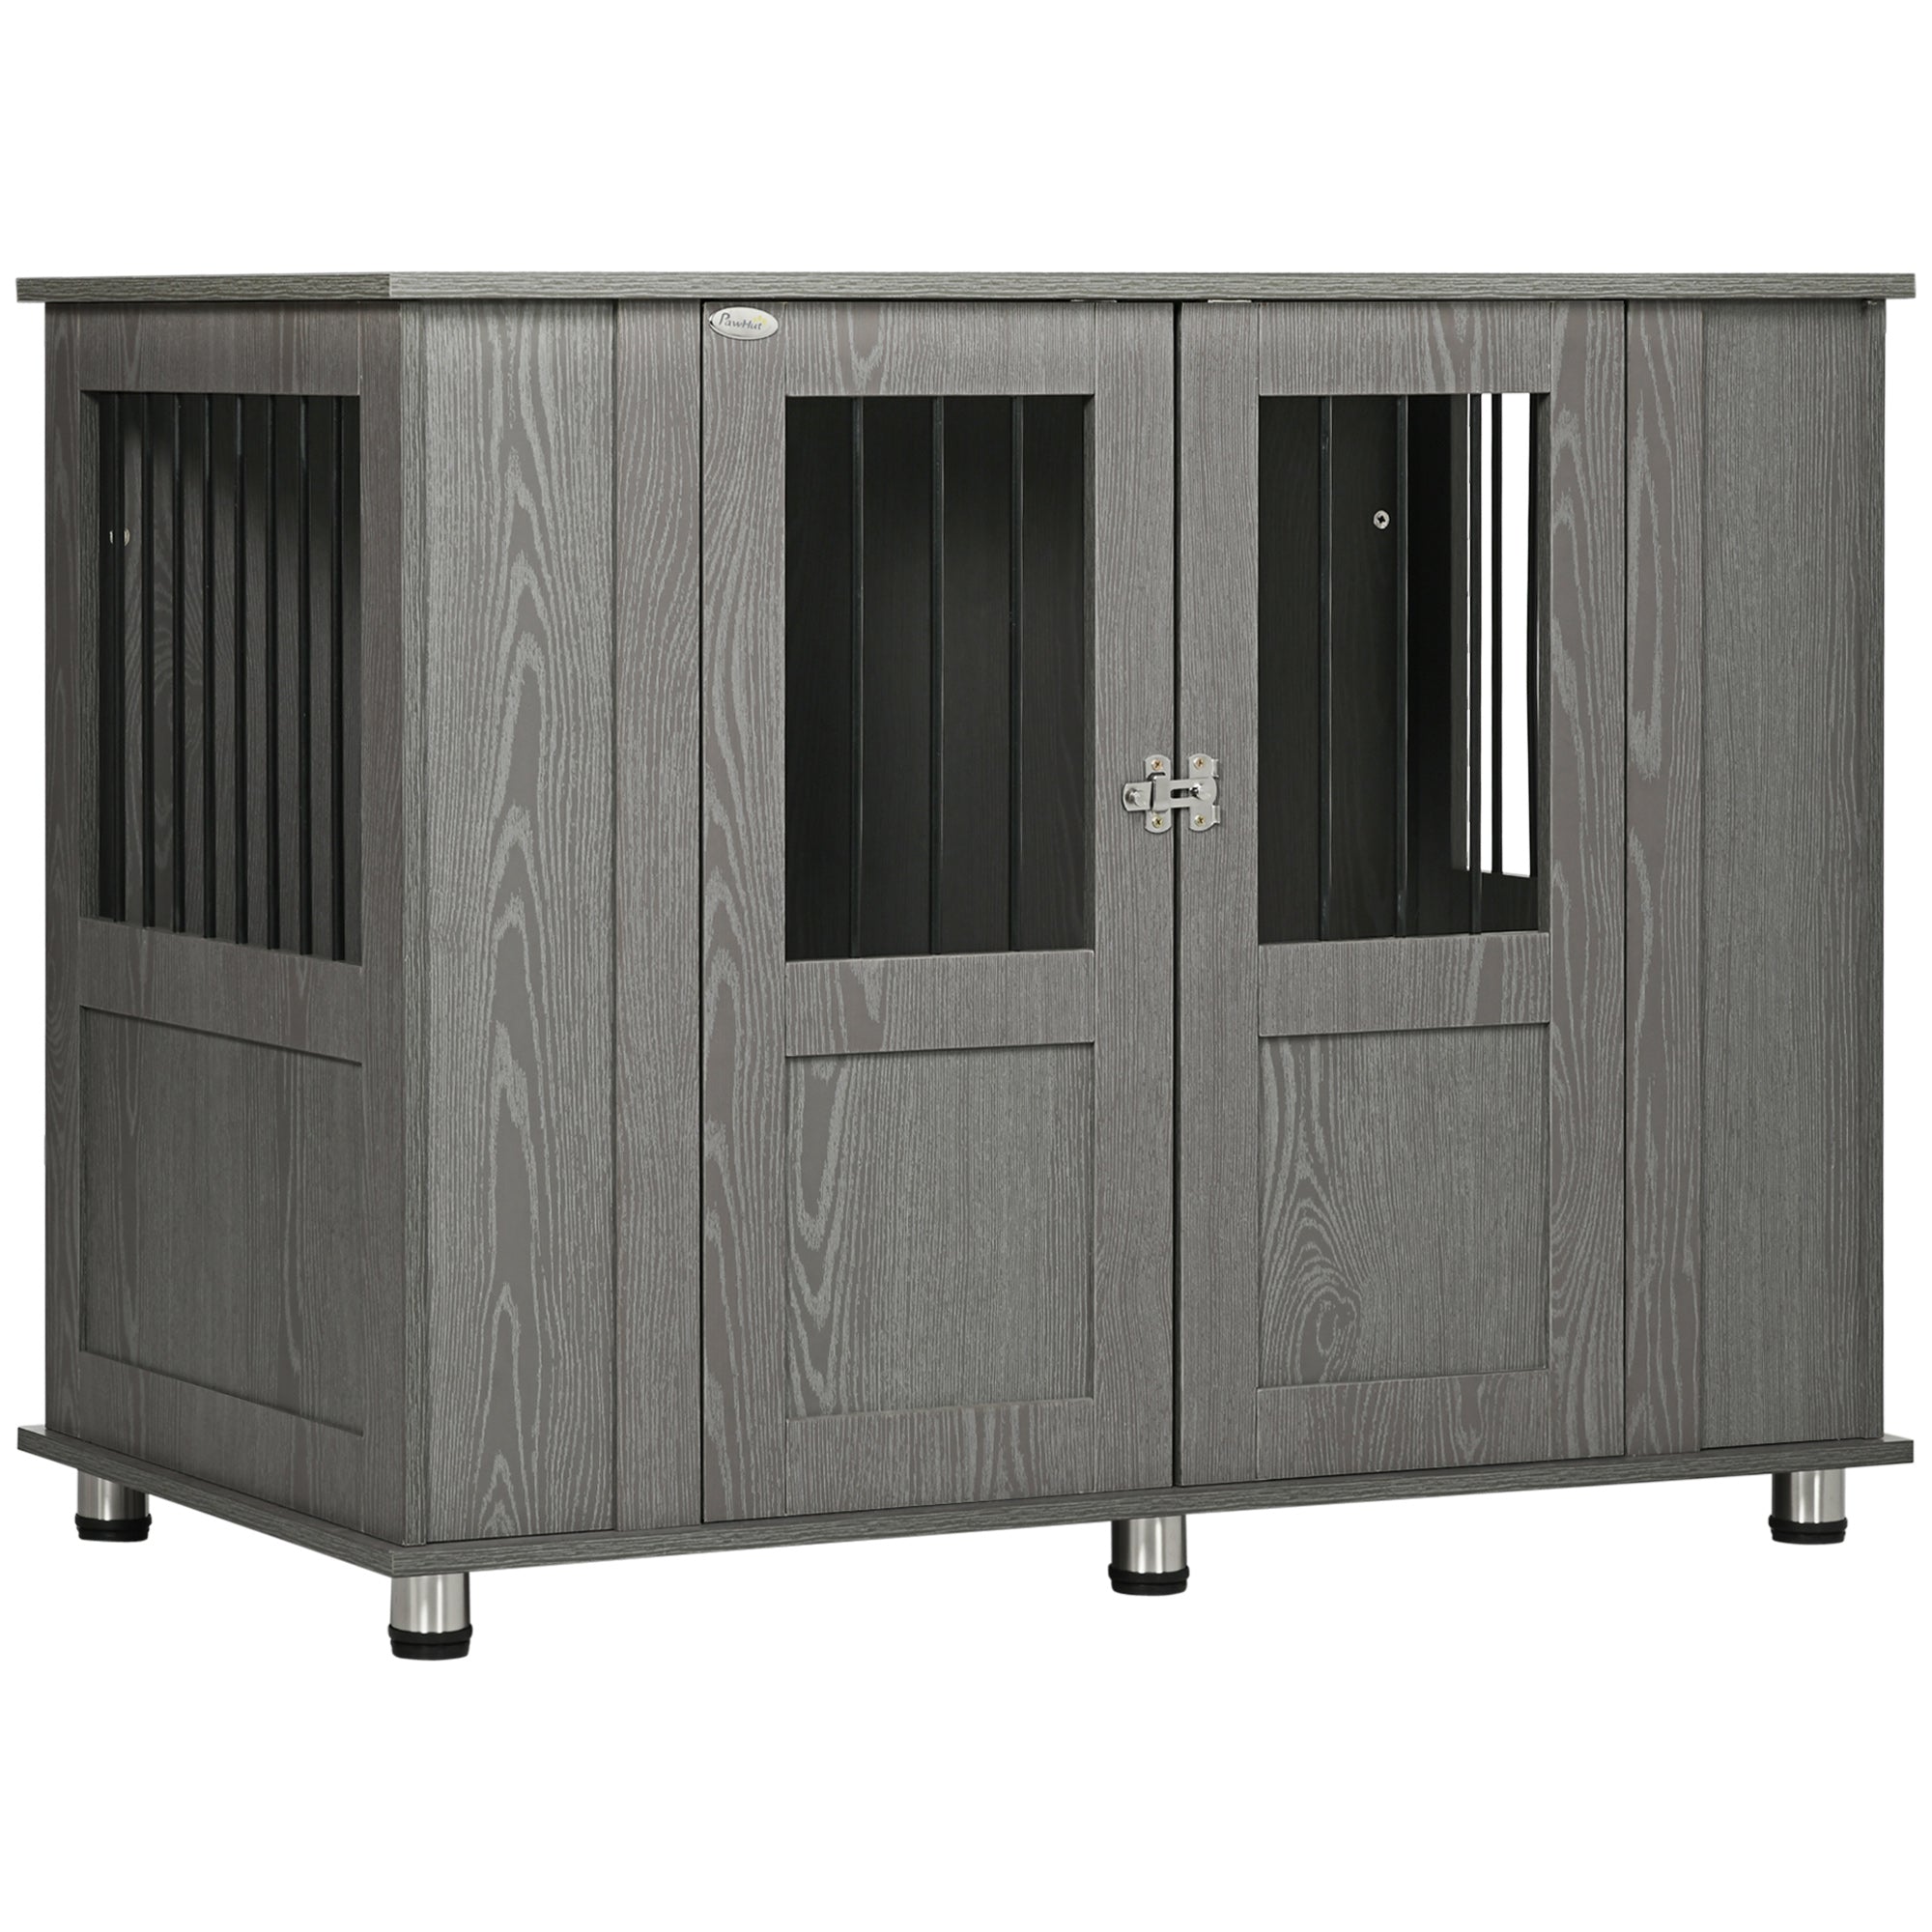 Dog Crate Furniture End Table, Pet Kennel for Extra Large Dogs with Magnetic Door Indoor Animal Cage, Grey, 116 x 60 x 87 cm-0